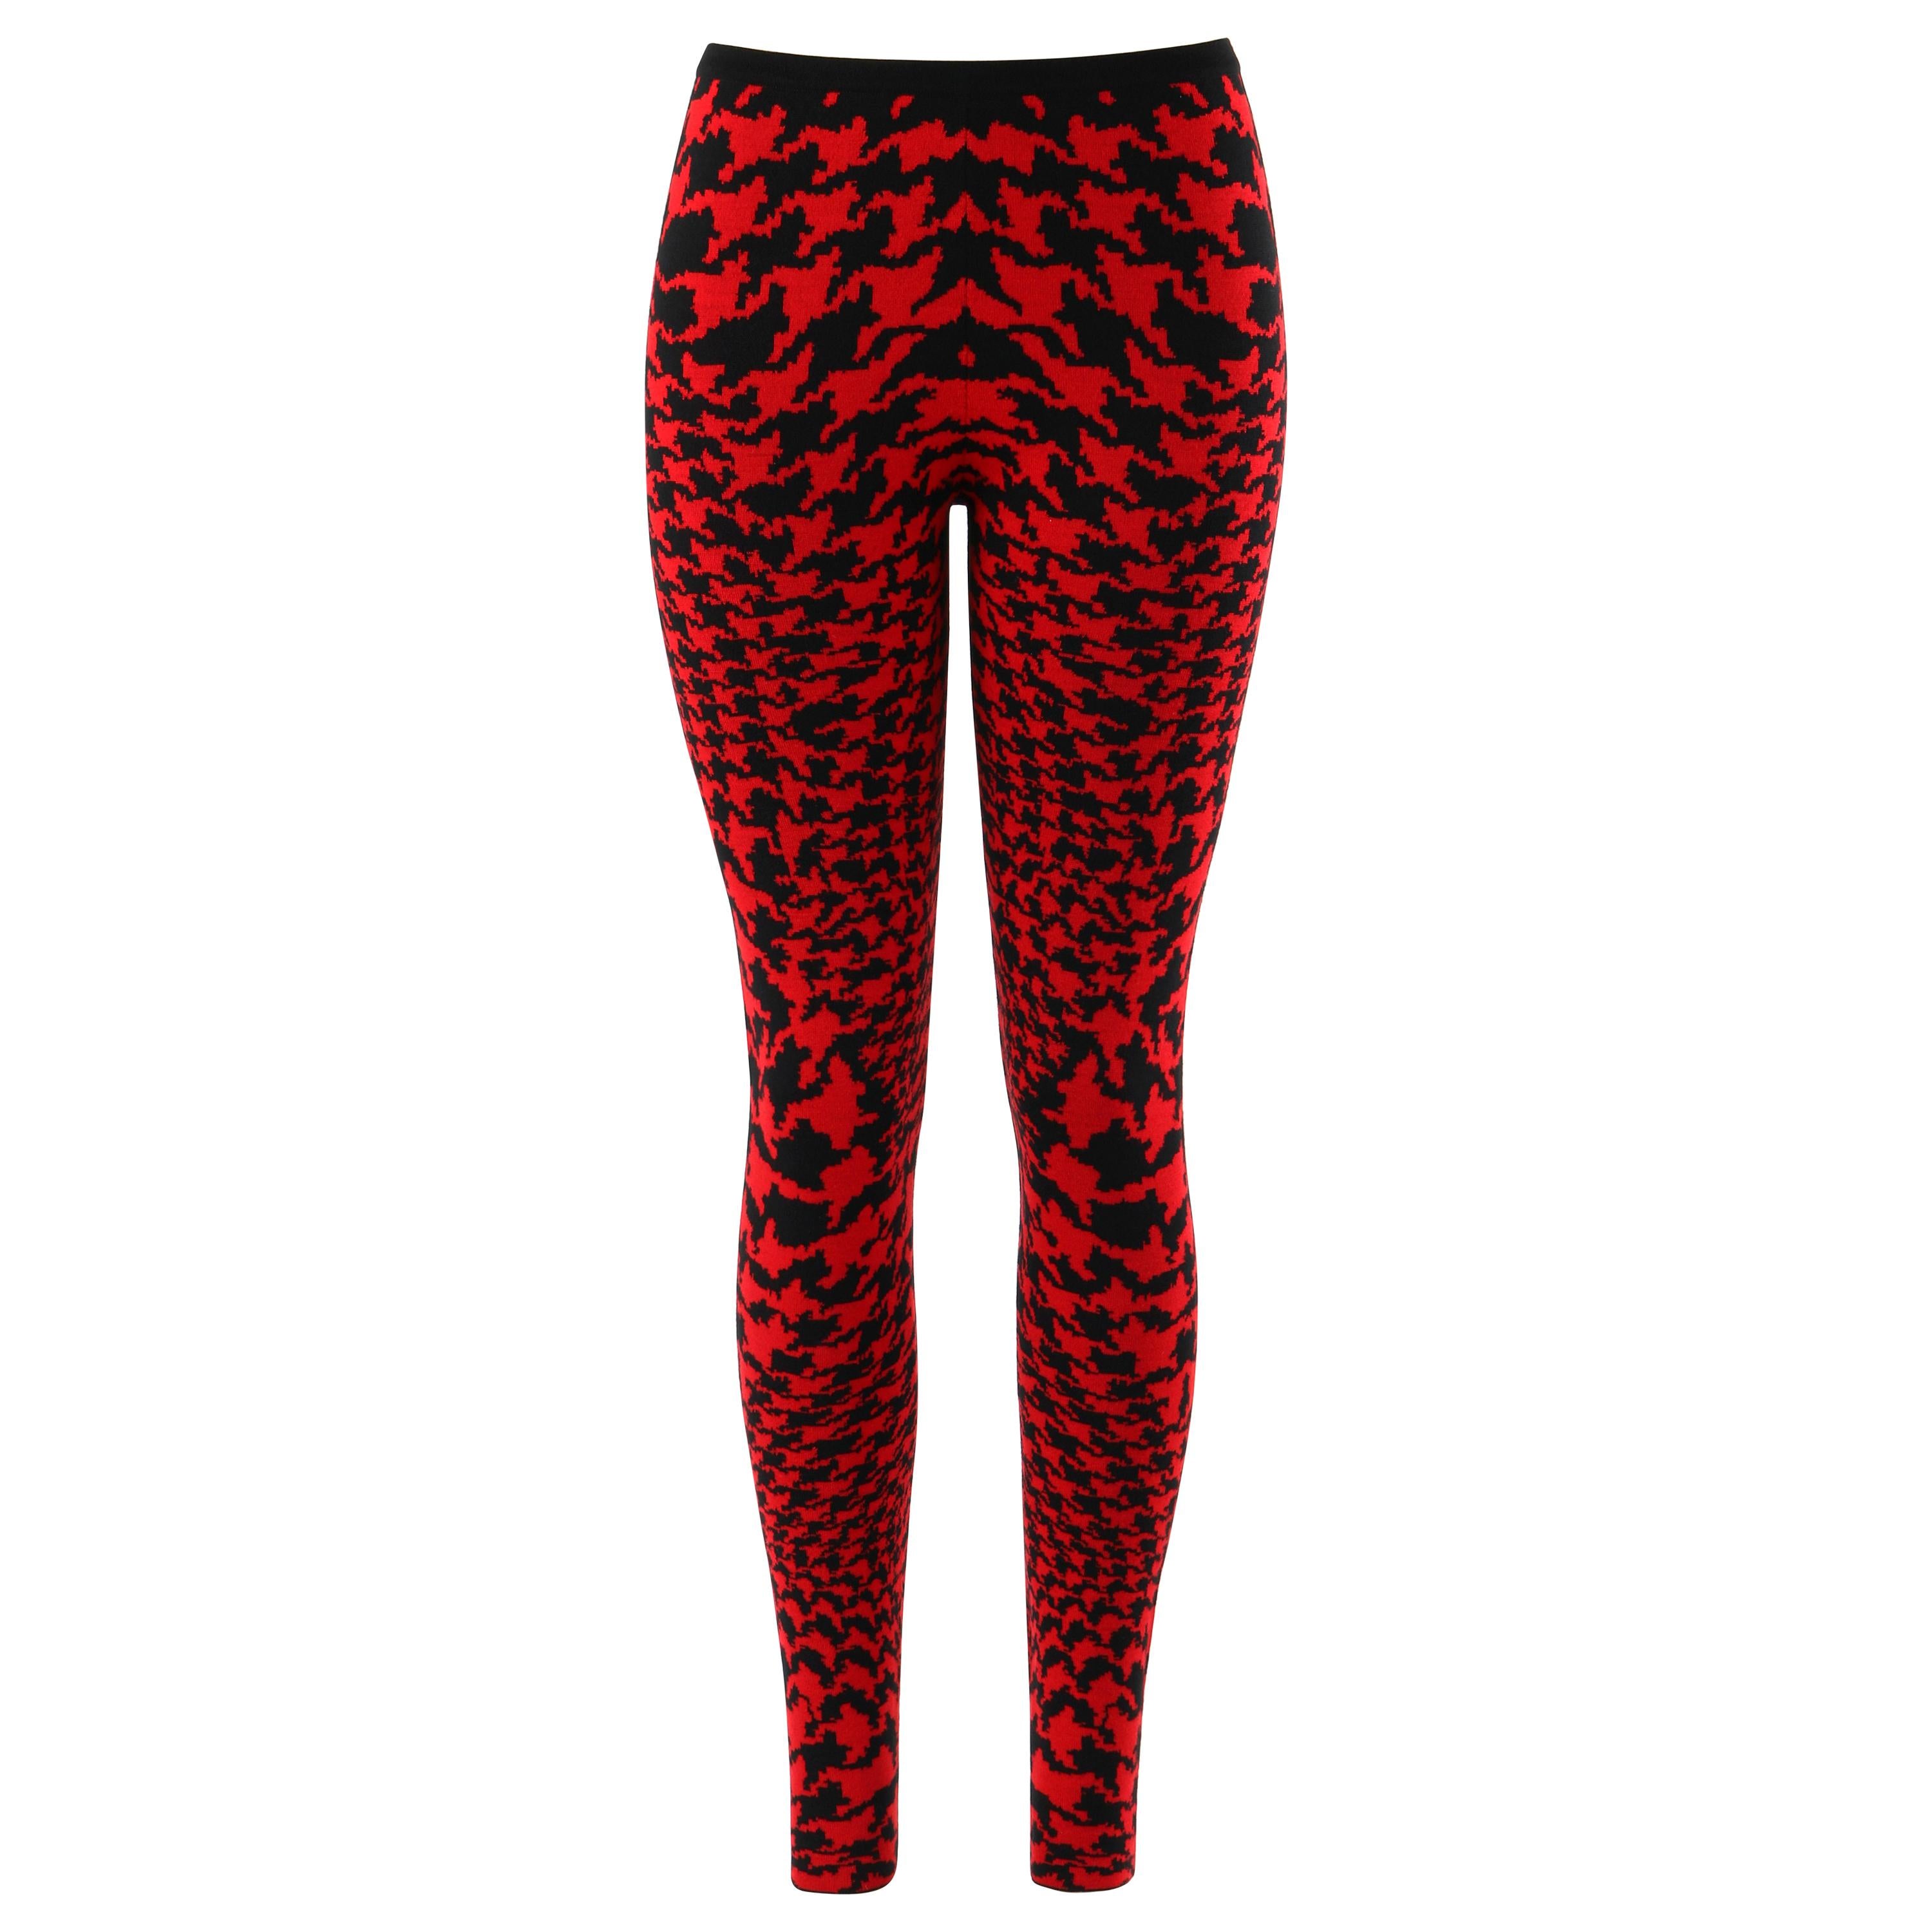 ALEXANDER McQUEEN A/W 2009 “The Horn Of Plenty" Dogtooth Wool Knit Legging NWT For Sale